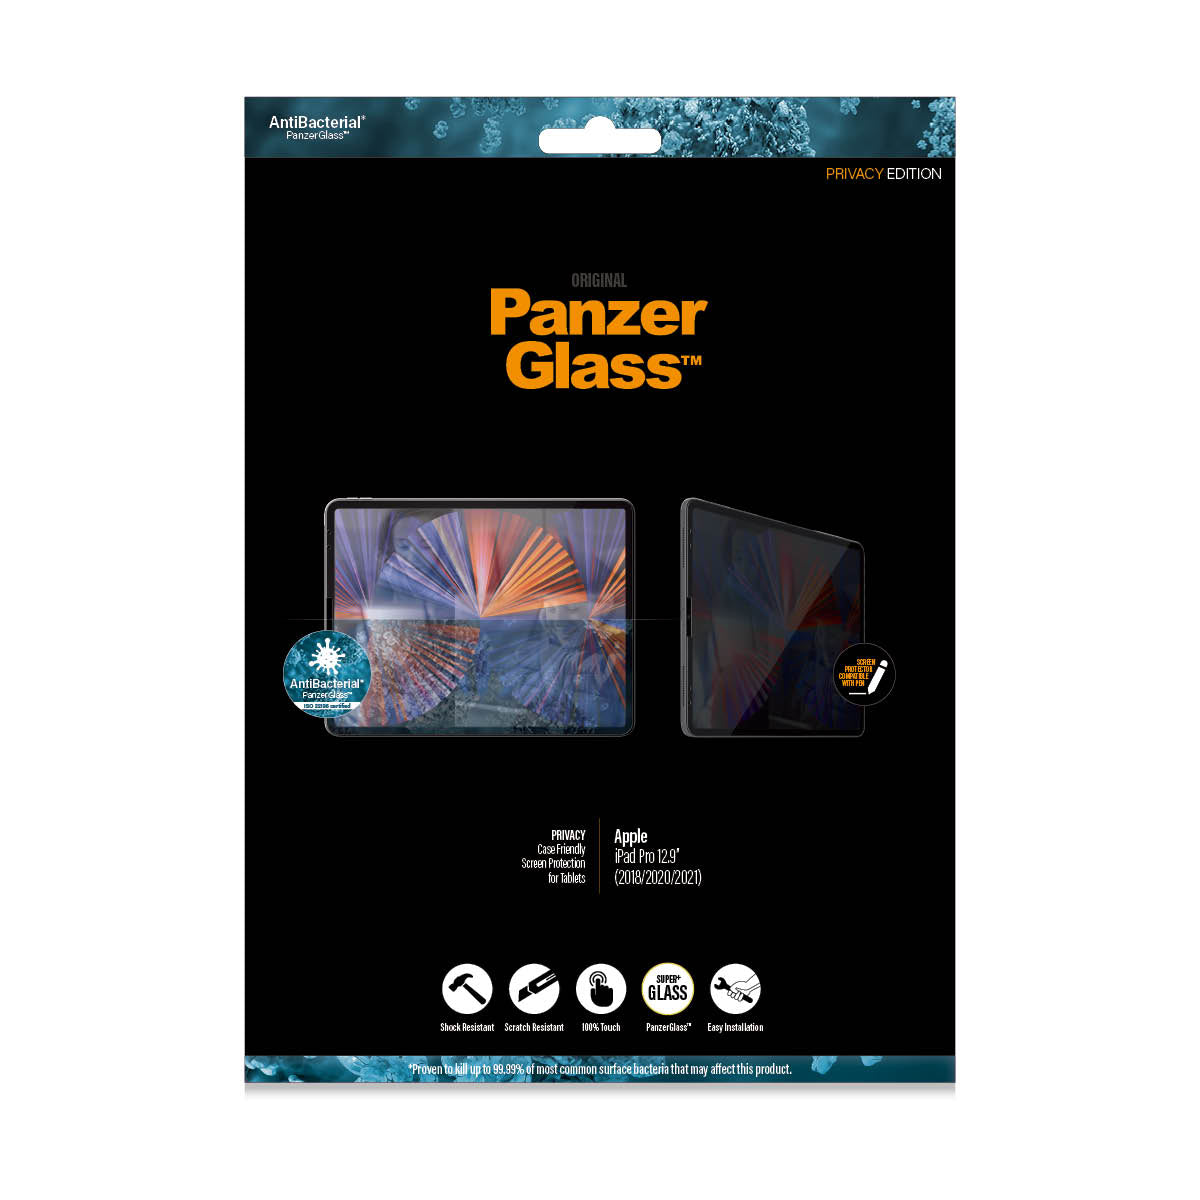 [OPEN BOX] PANZERGLASS iPad Pro 12.9 2021/2020 Screen Protector Privacy Filter - Clear